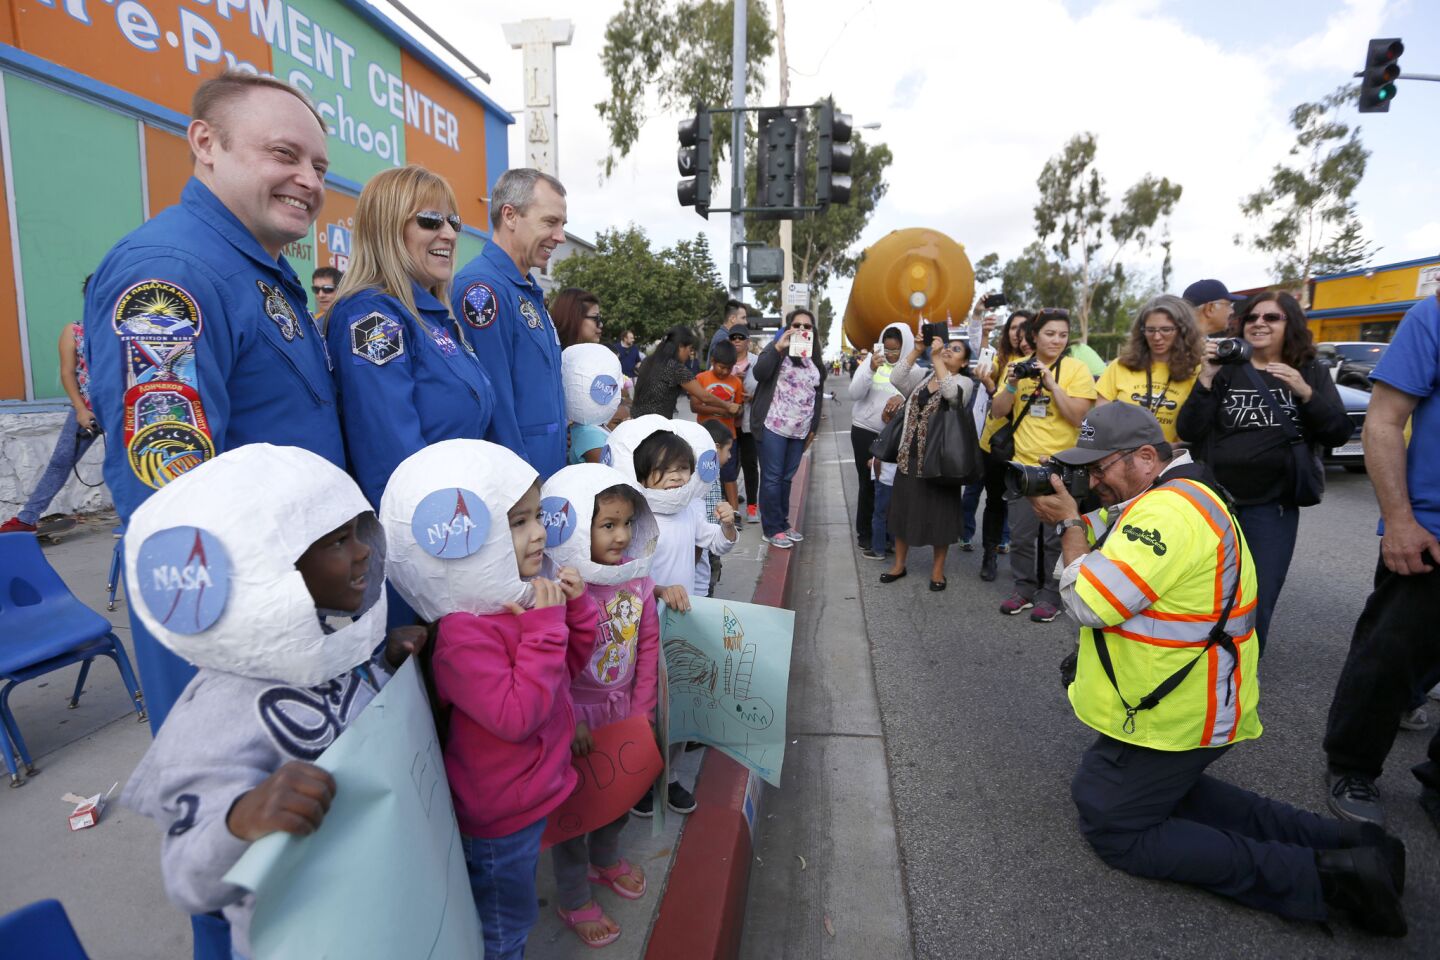 Astronauts pose with children as ET-94, the giant orange external fuel tank, is en route to the California Science Center on Saturday.